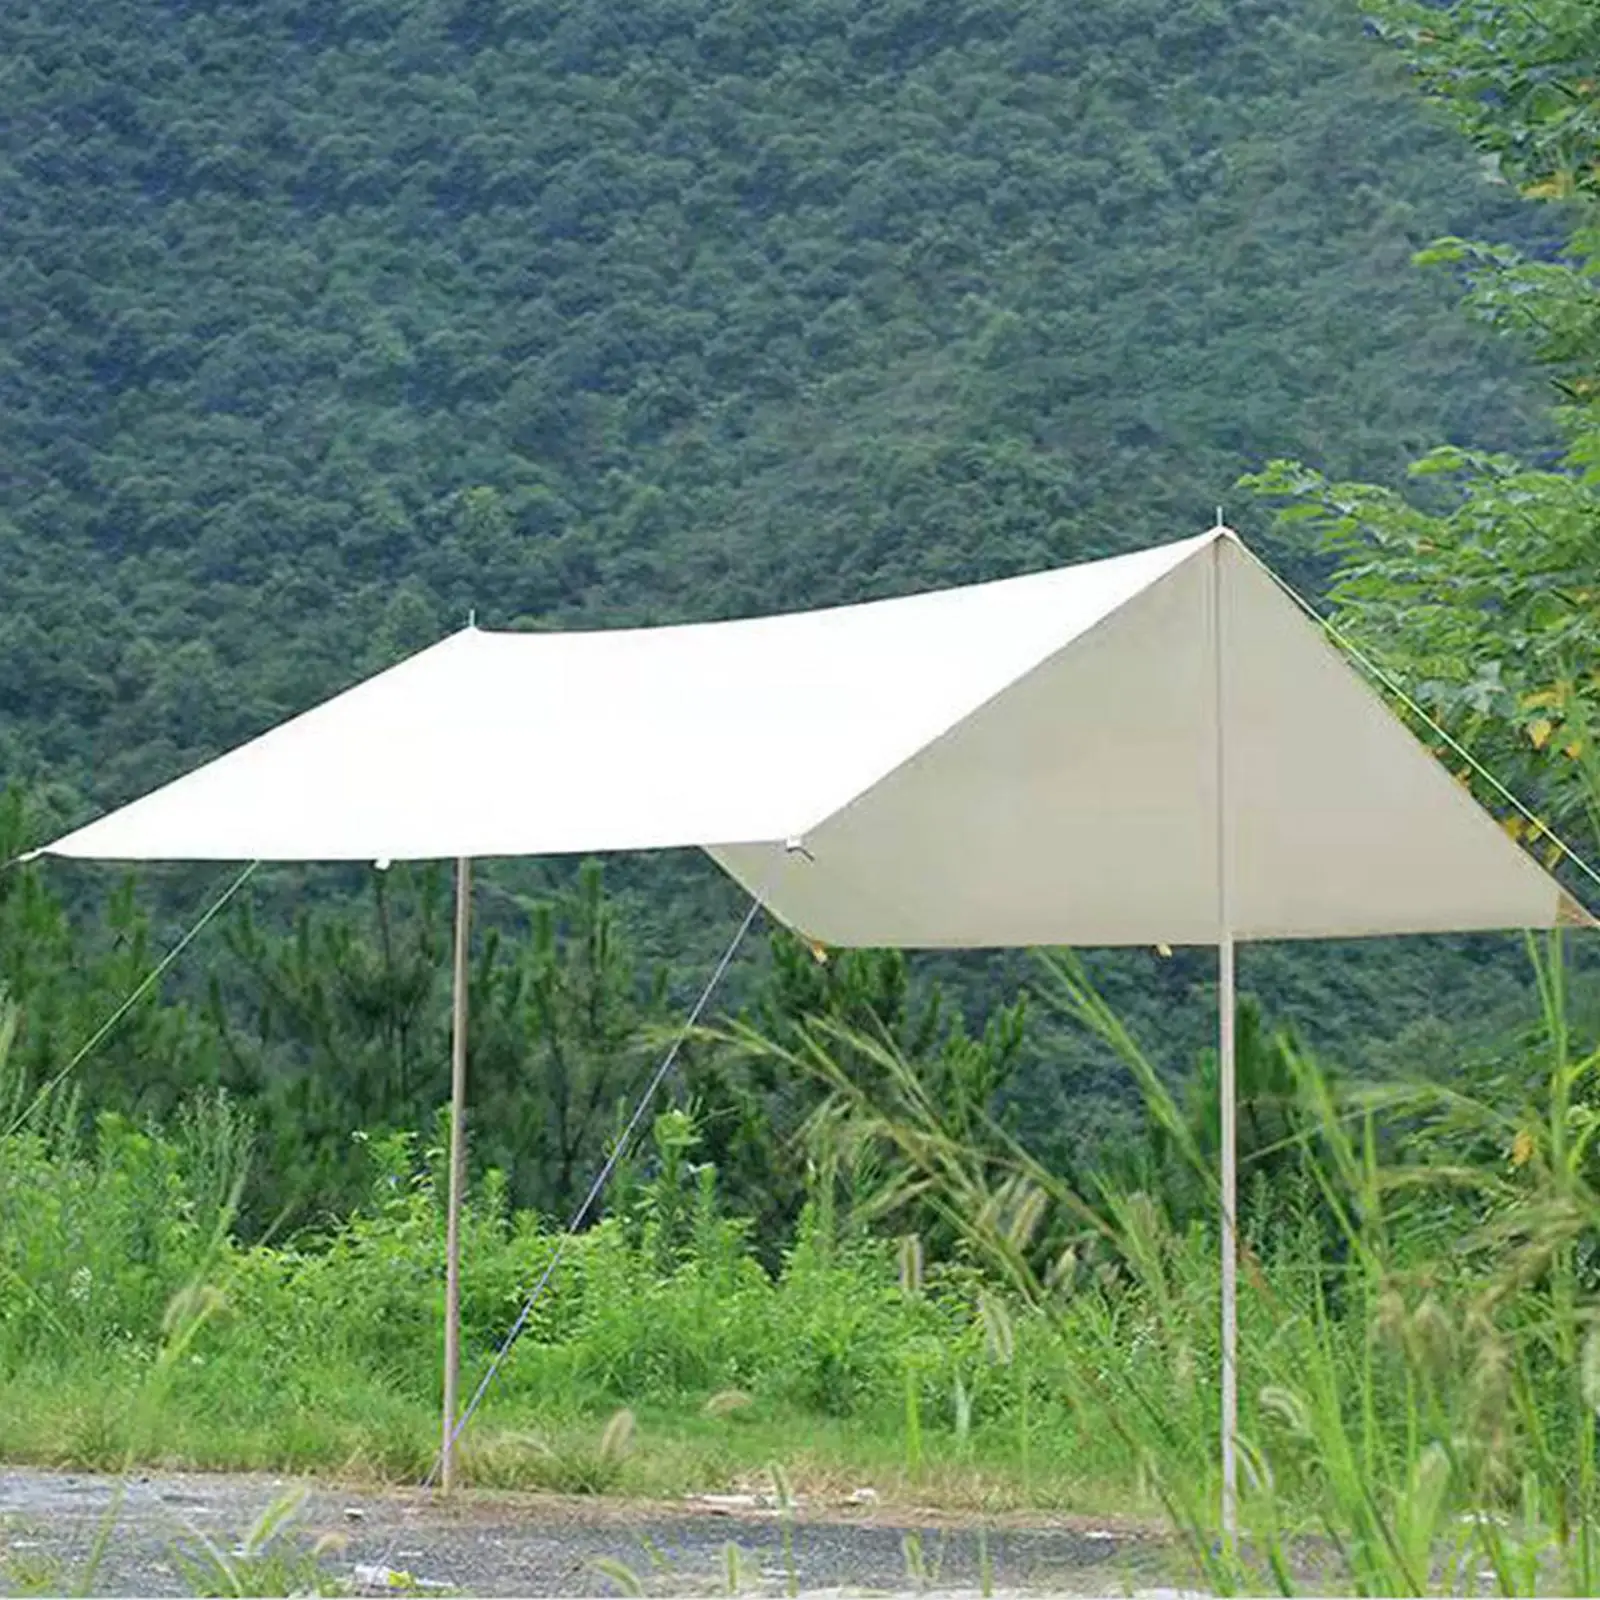 Portable Camping Tent Tarp Sun Shelter Rainproof Awning Sun Protection for Outdoor Backpacking Hiking Picnic Traveling